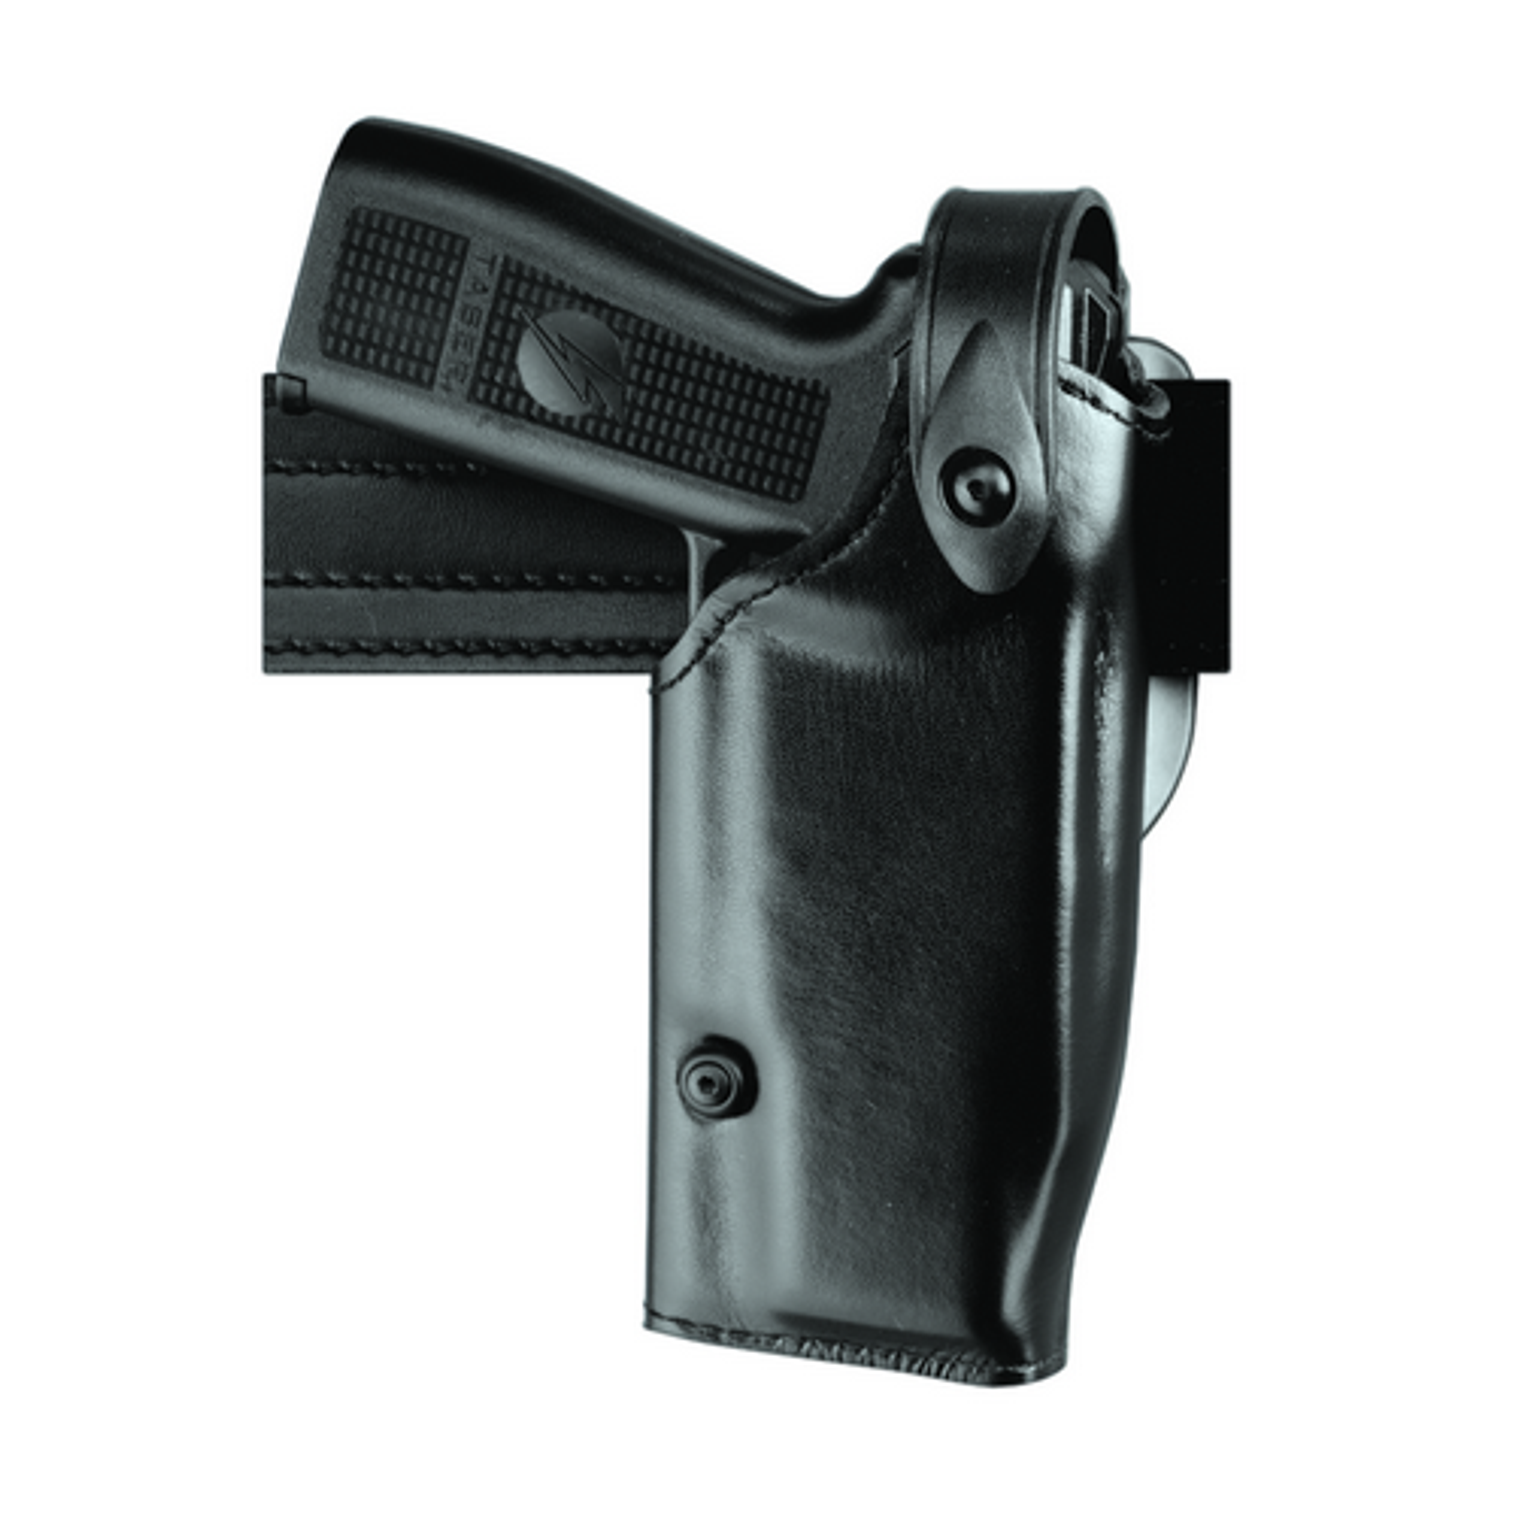 Model 6280 Sls Mid-ride Level Ii Retention Duty Holster For Smith & Wesson M&p 9 - KR6280-219-82